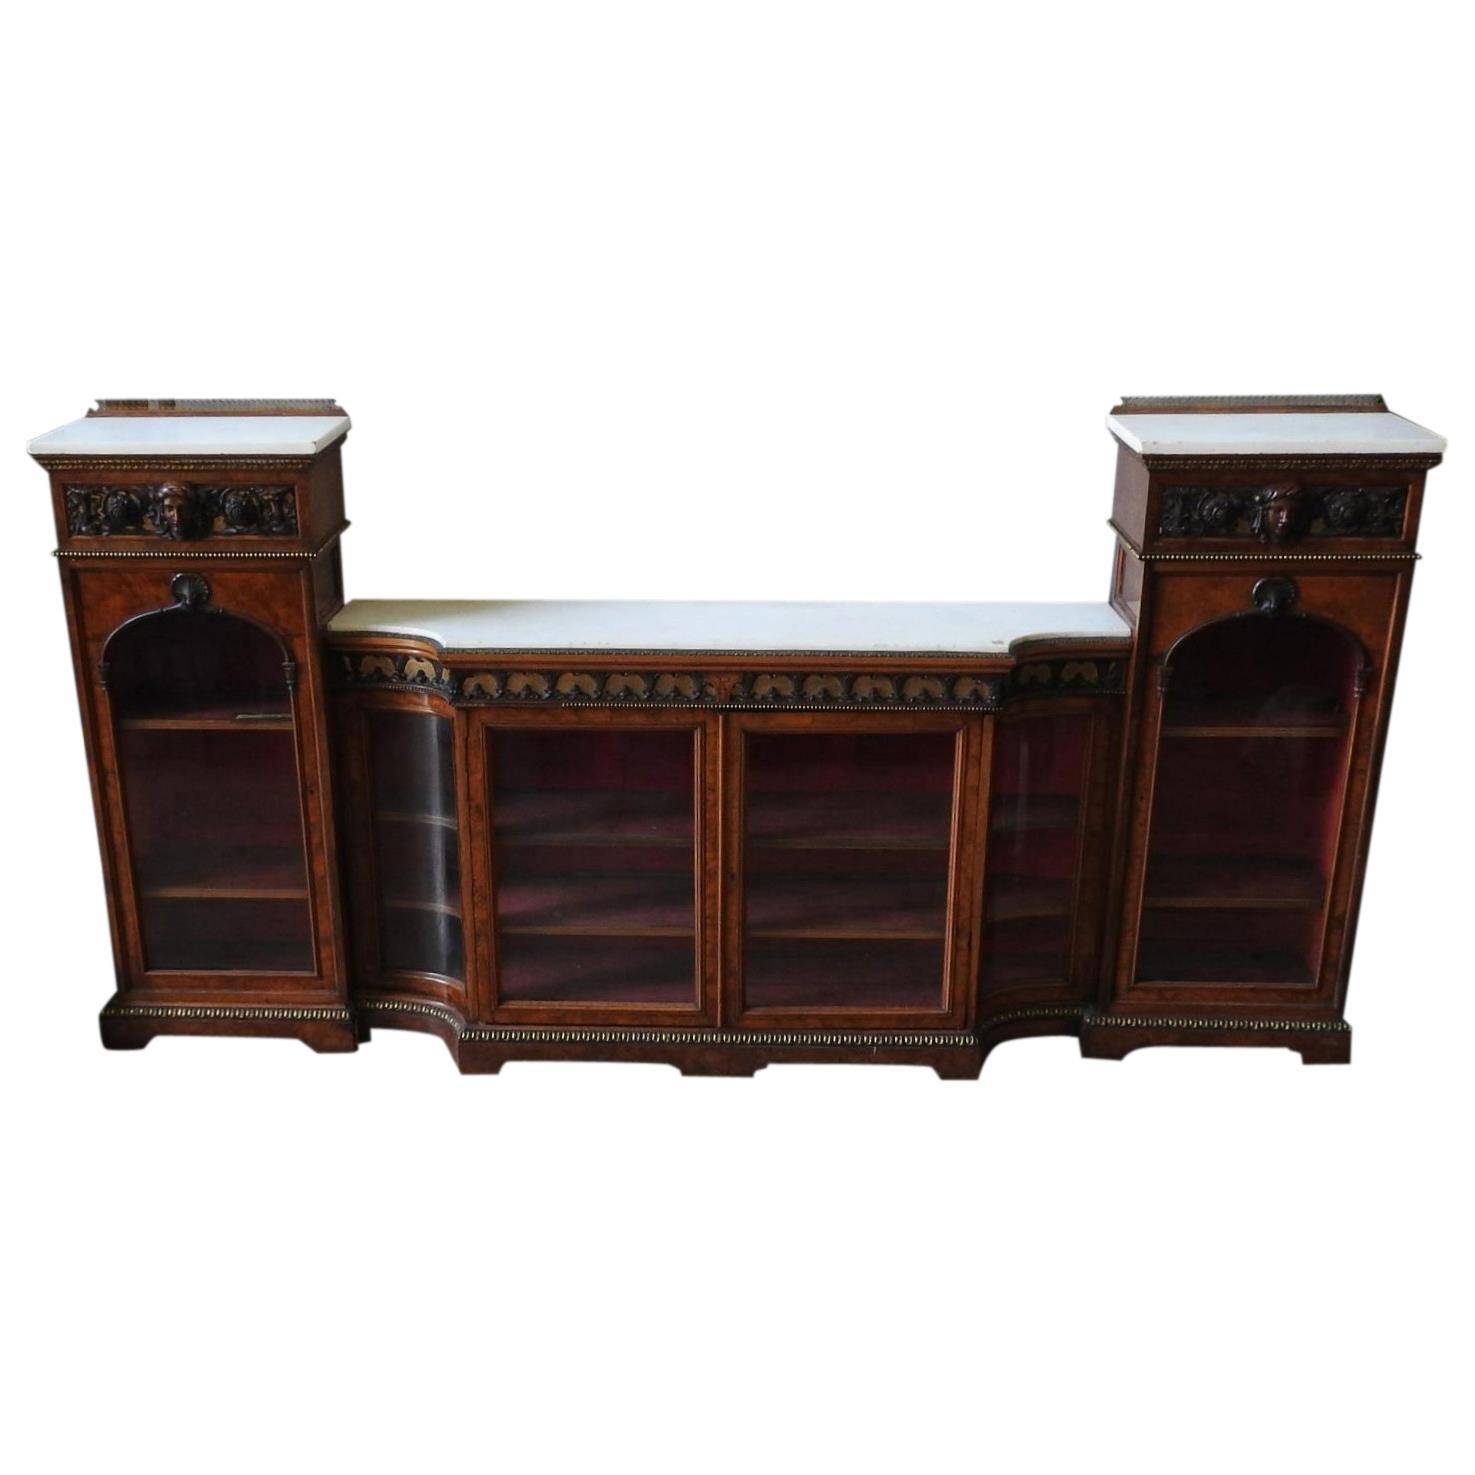 A 19TH CENTURY 'GILLOWS' MARBLE TOP WALNUT SIDEBOARD, a central break front cabinet section with